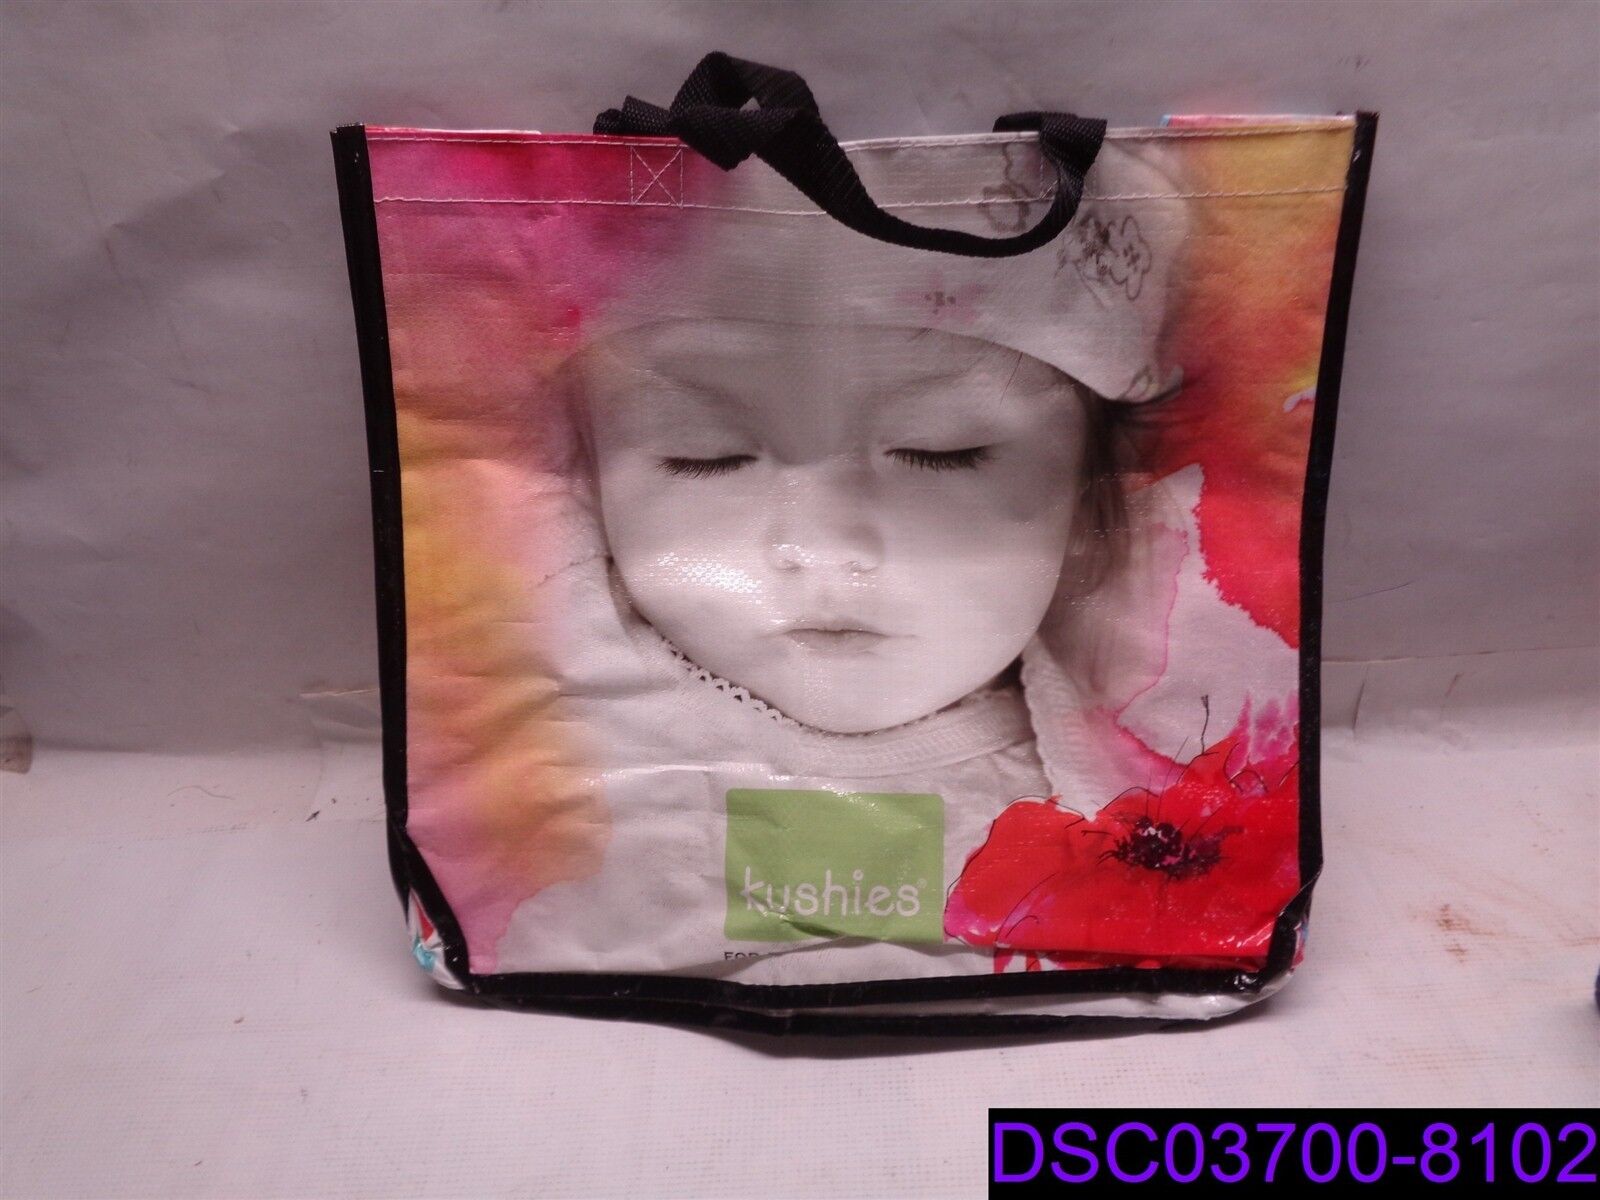 Qty = 32: Kushies Eco Recyclable Shopping Bag Does not apply Does Not Apply